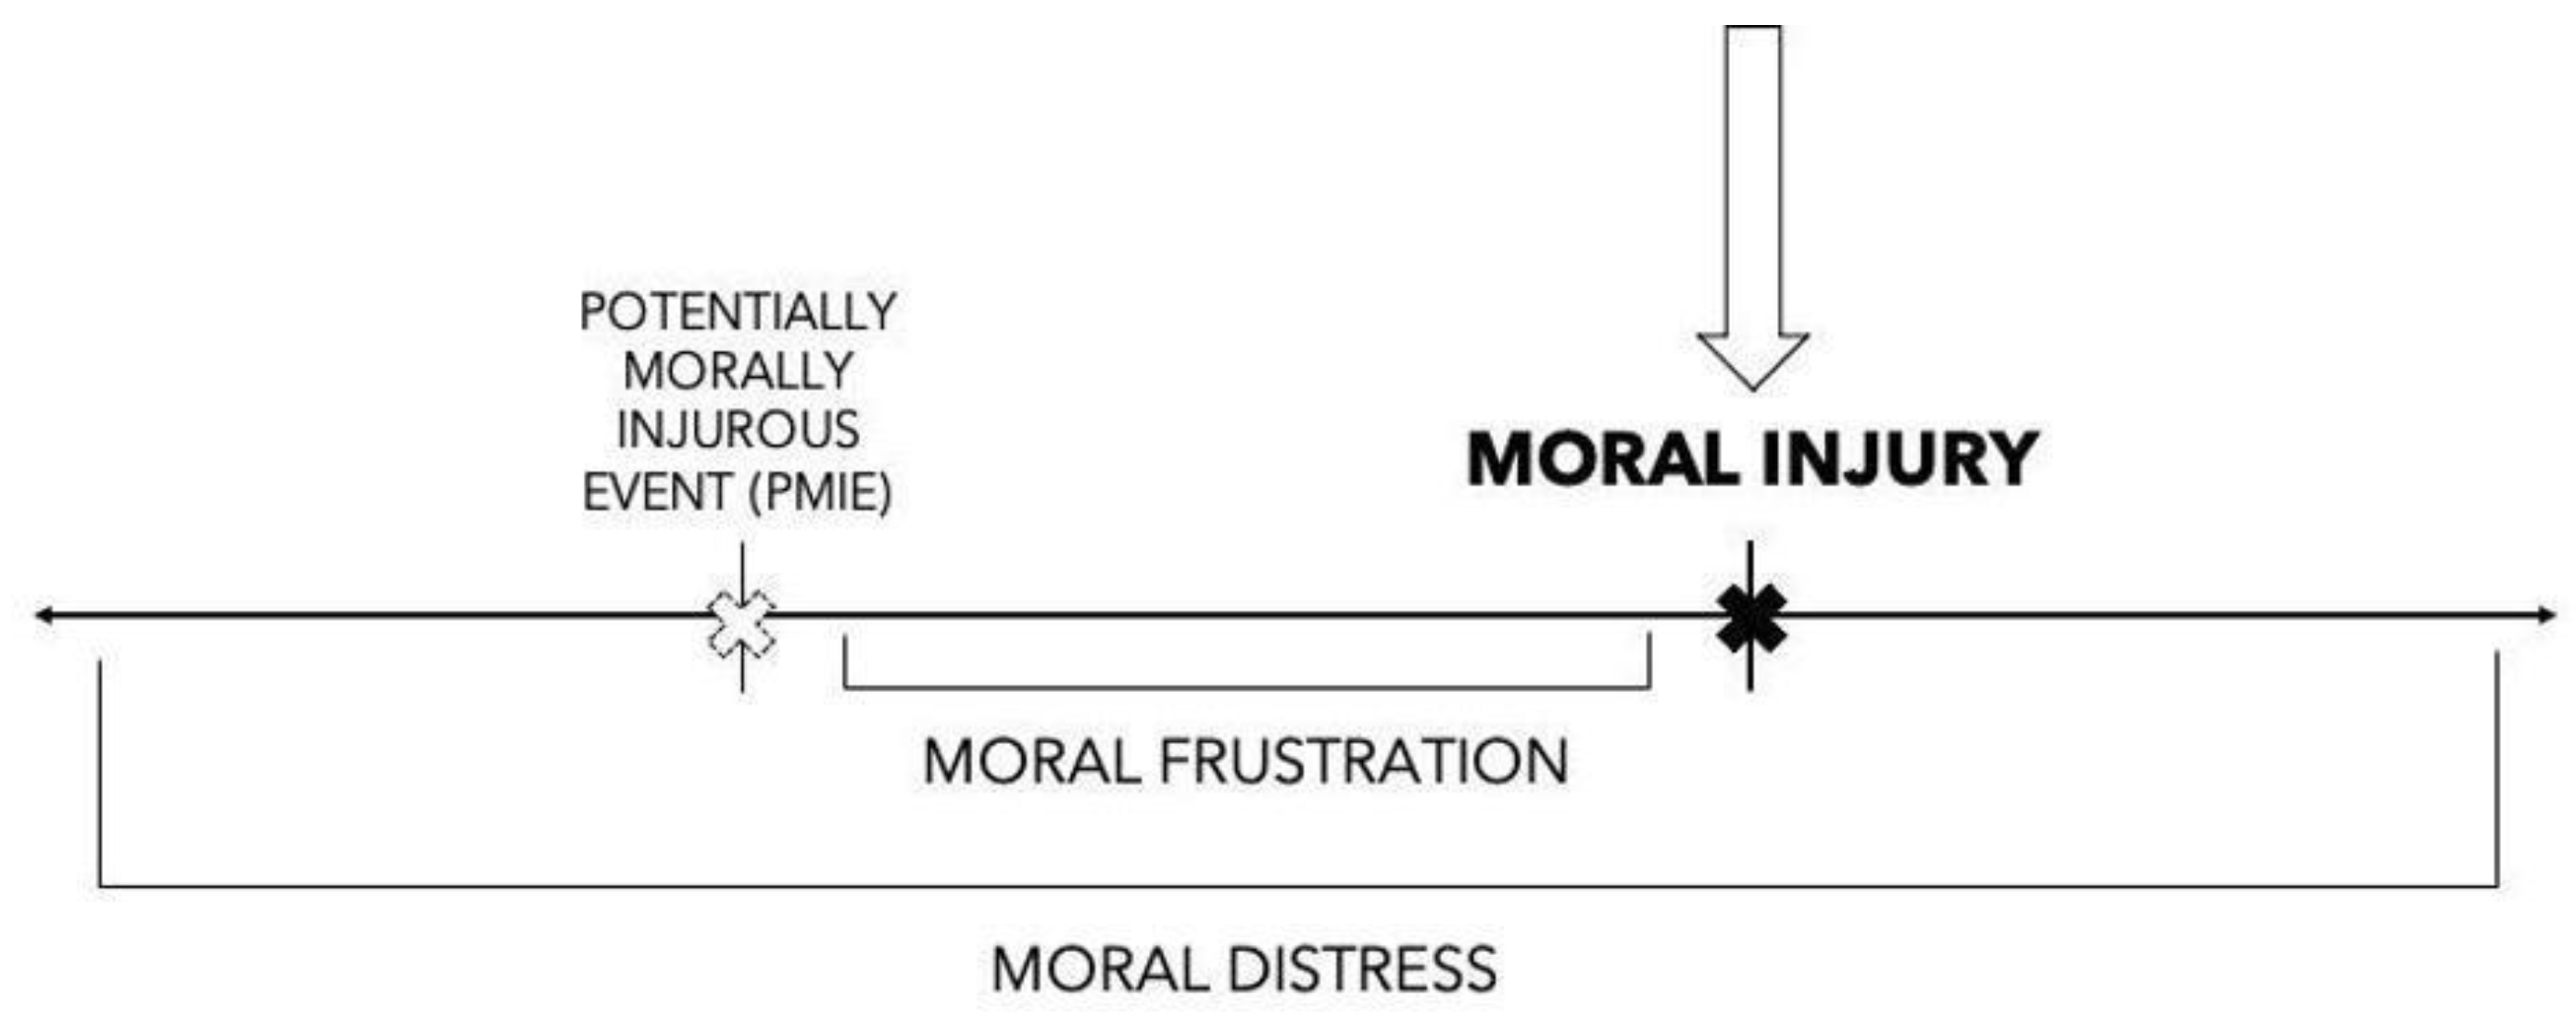 IJERPH | Free Full-Text | The Association of Moral Injury and